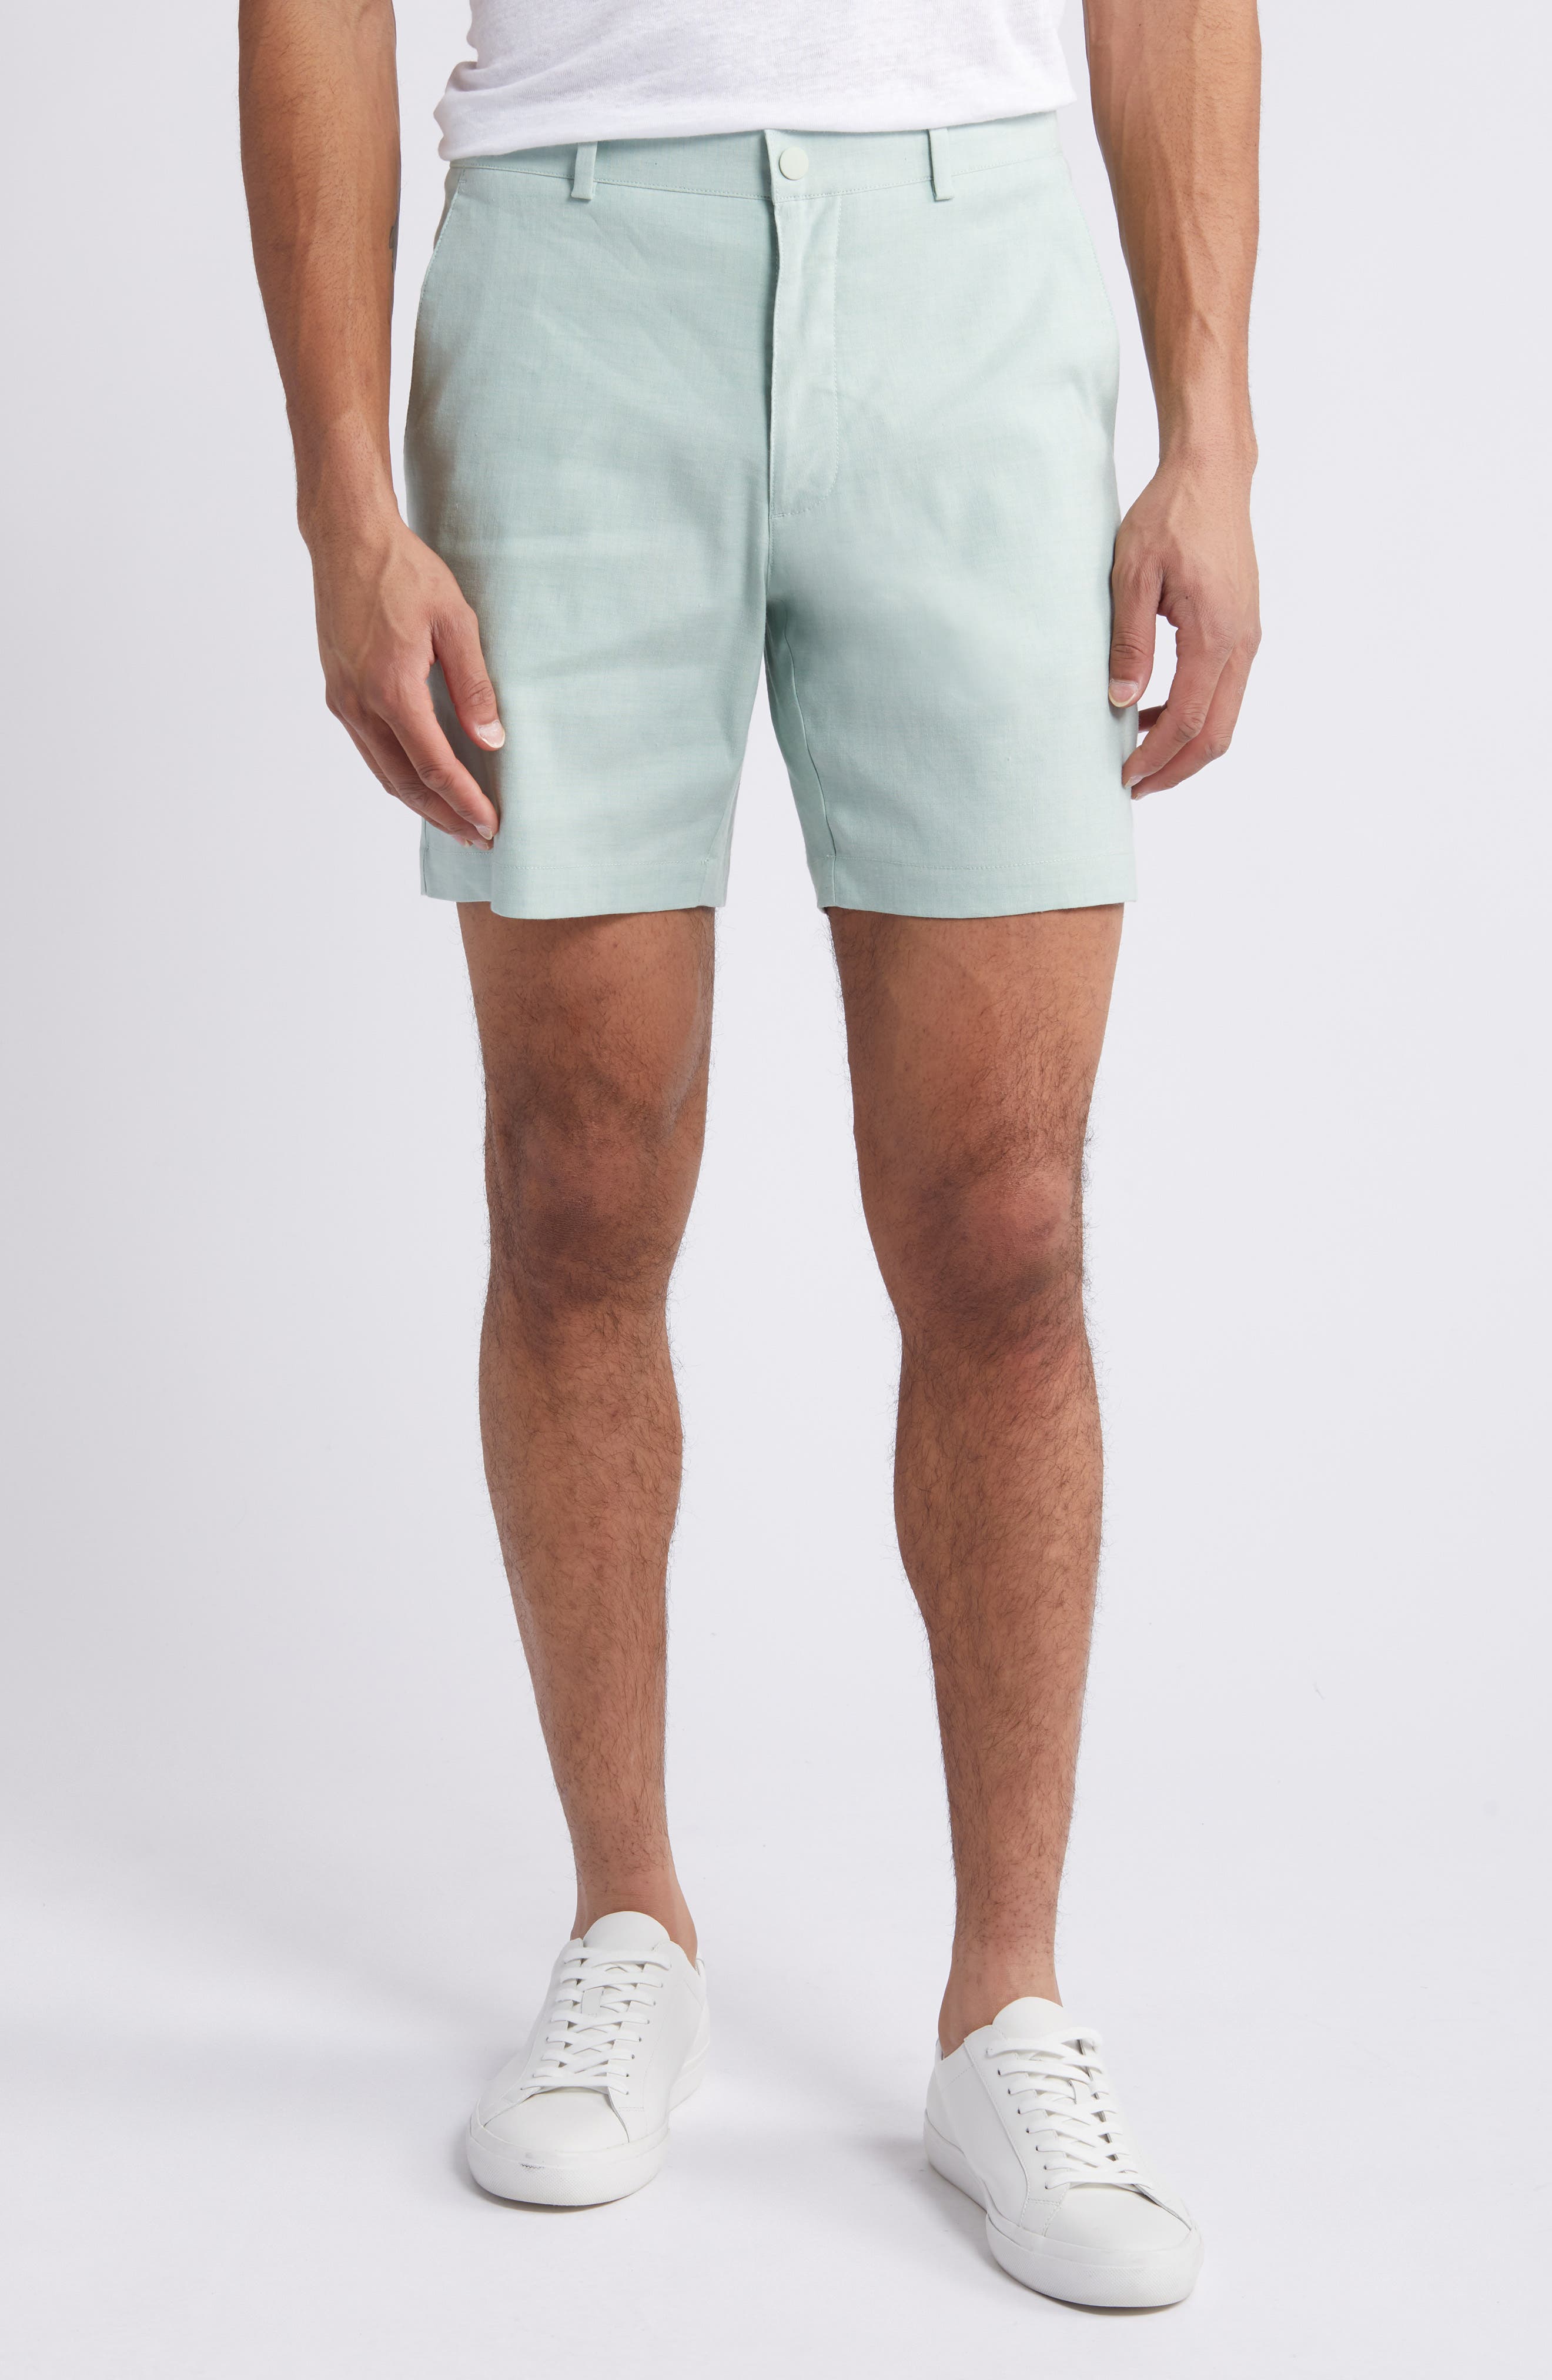 JW Anderson above-knee shorts - Green